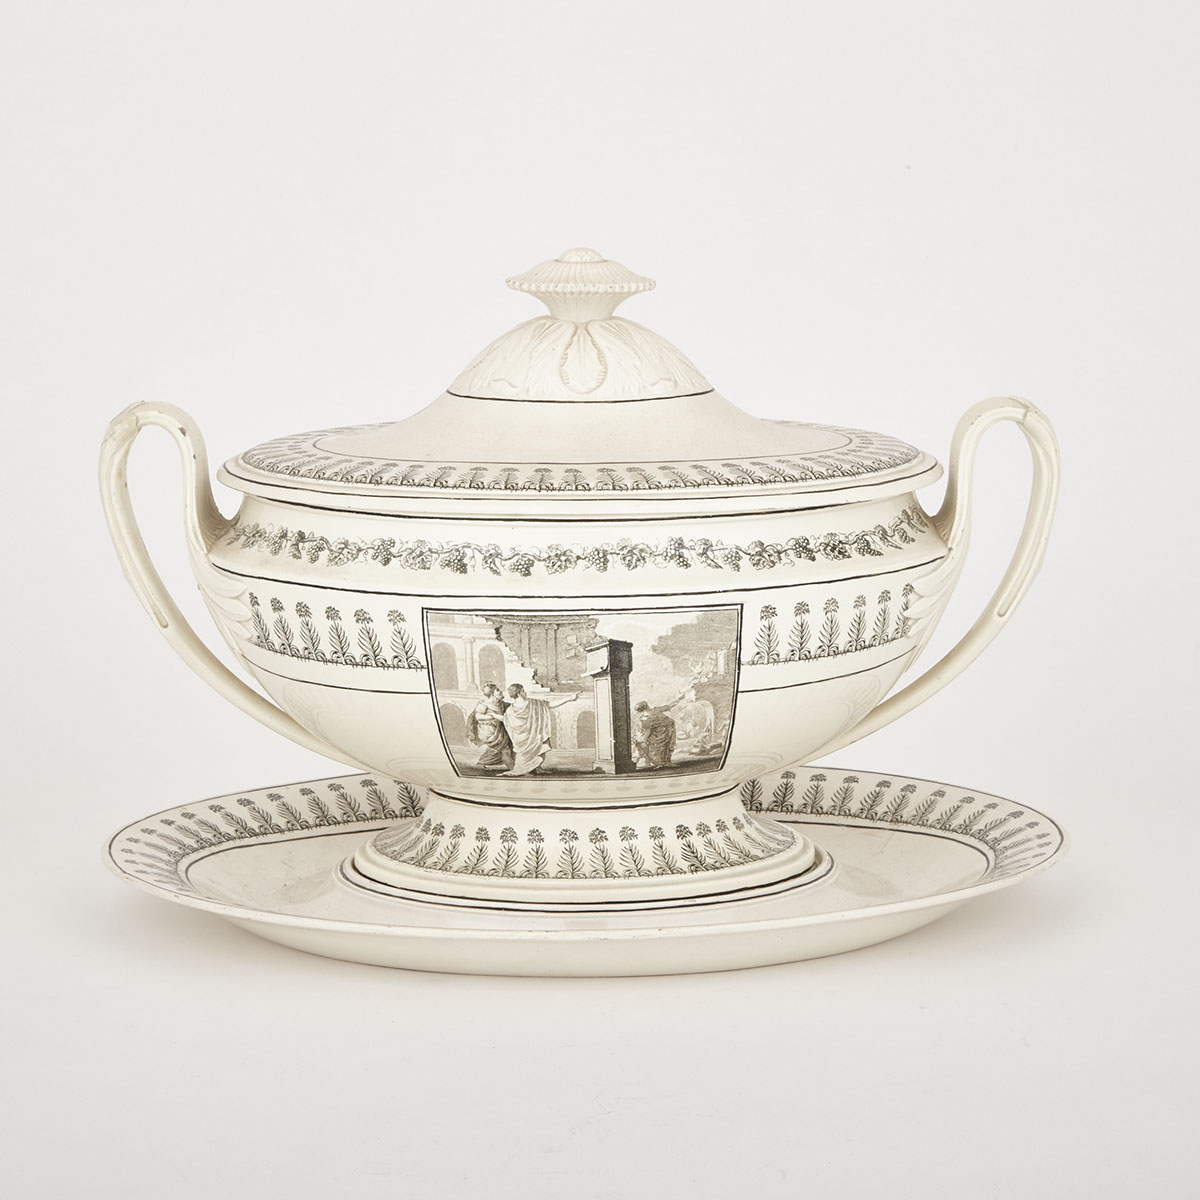 Creil ‘An de Rome’ Creamware Oval Soup Tureen with Cover and Stand, early 19th century